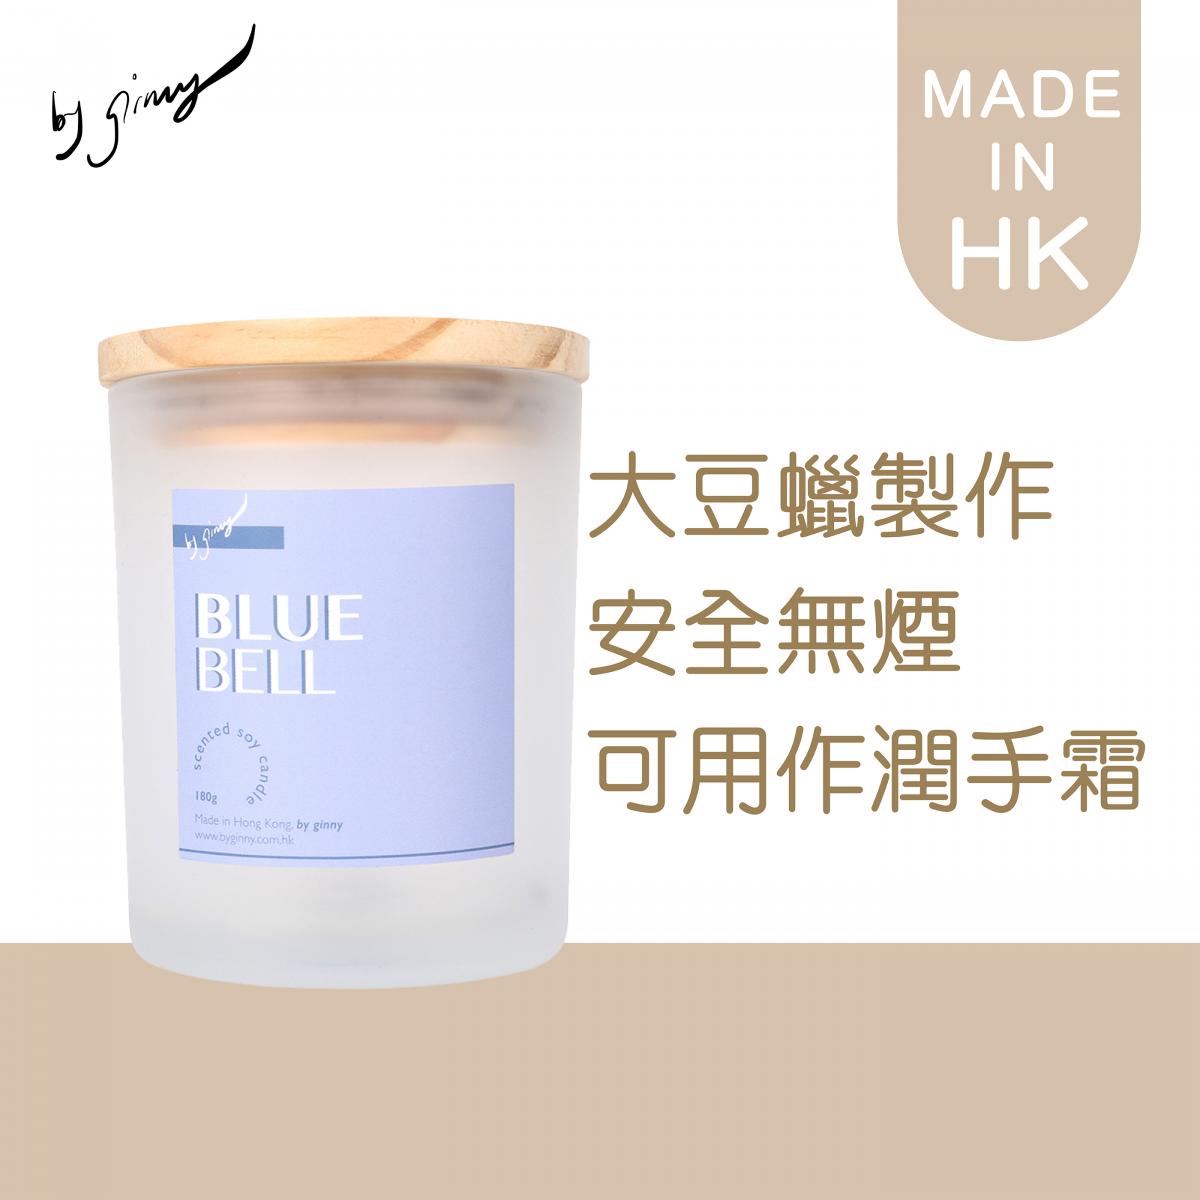 (Made in HK)Soy Wax  Candle -Blue bell 180G